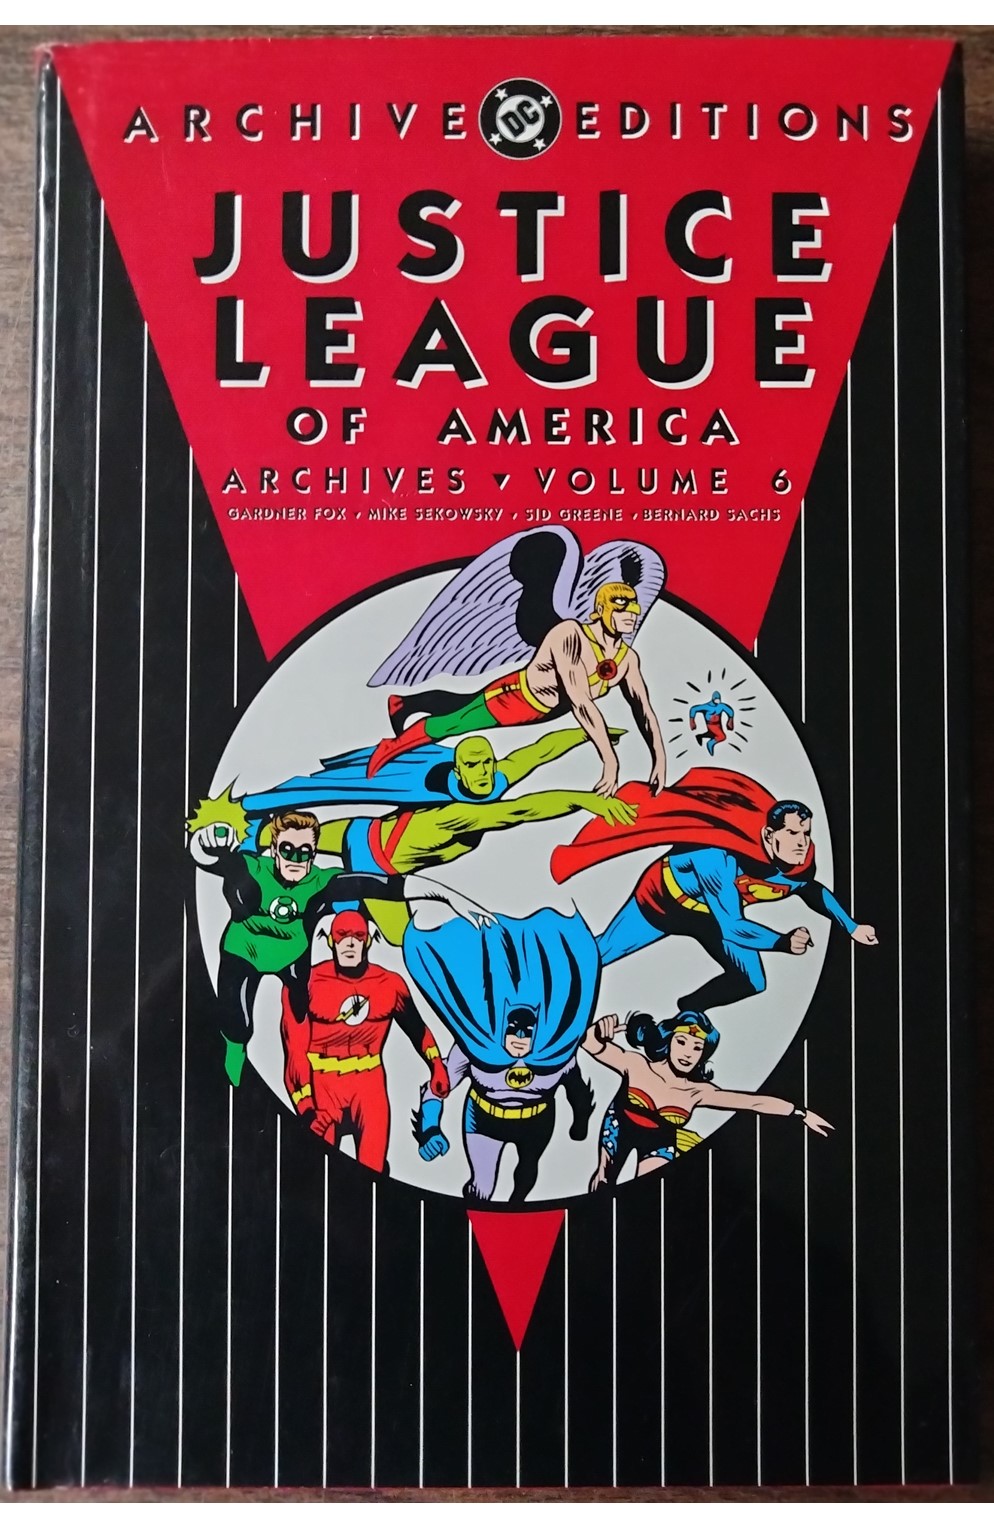 Justice League of America Archives Volume 6 Hardcover (DC 2009) Used - Very Good